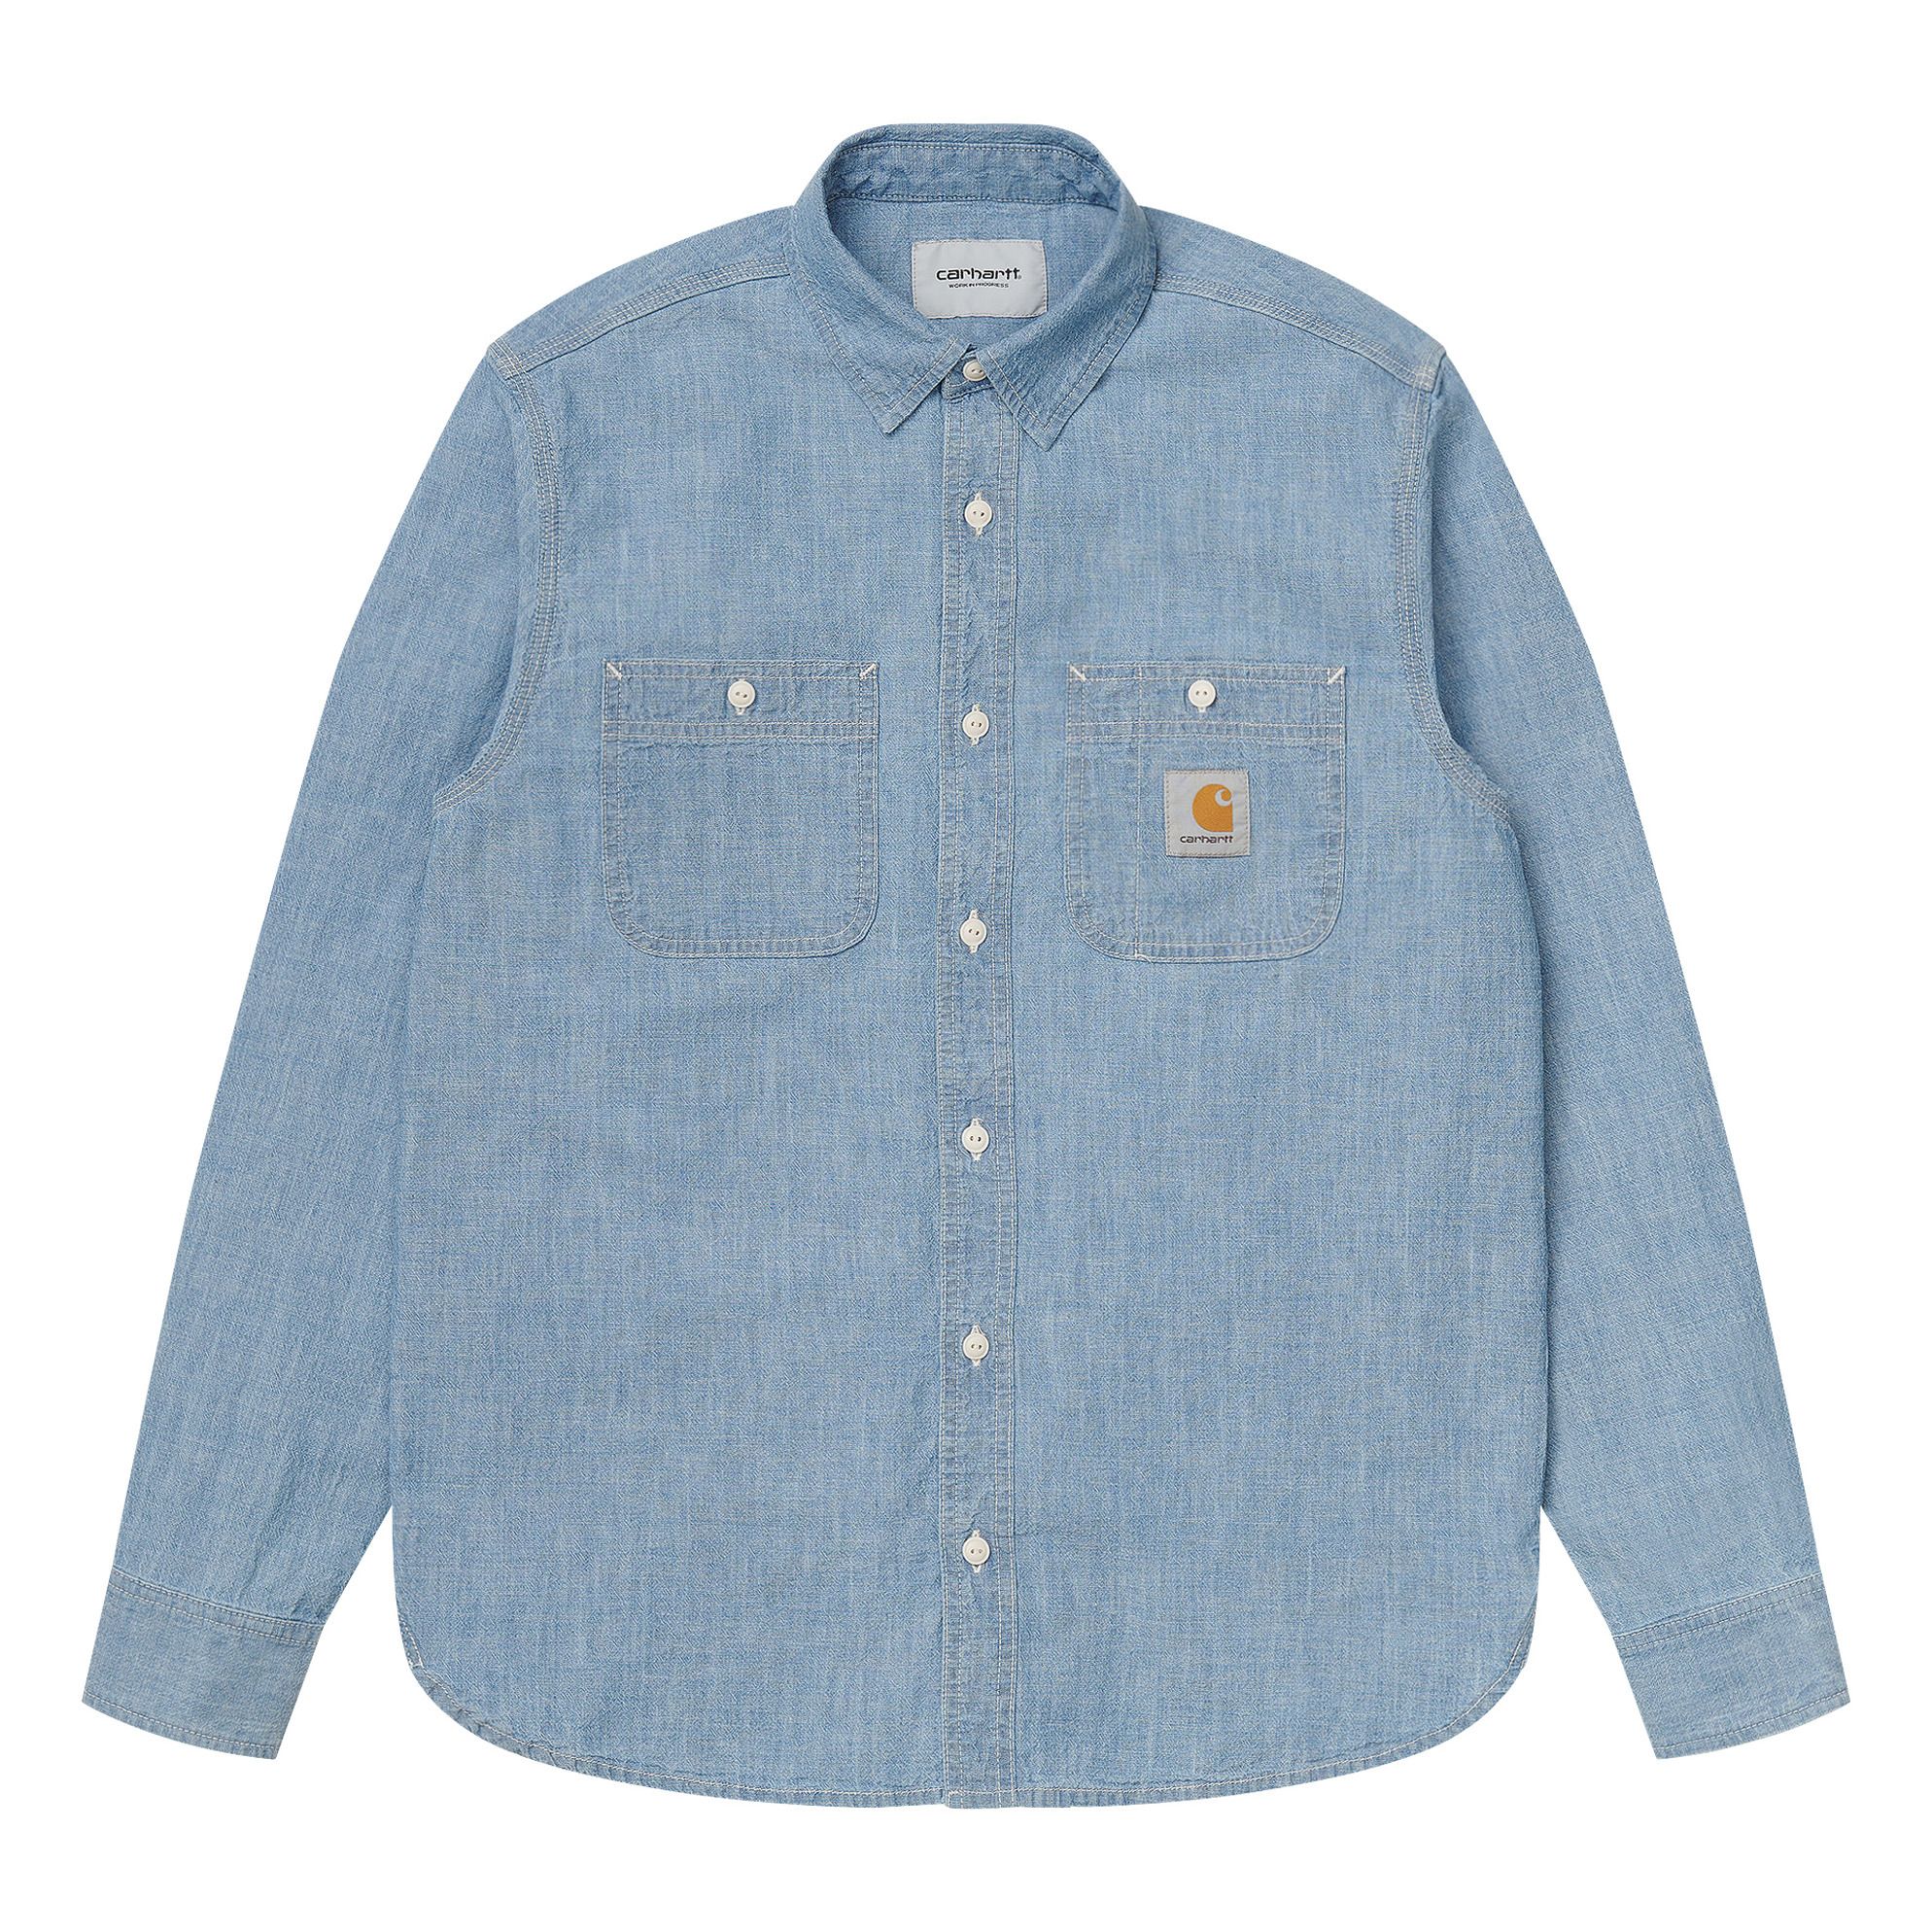 Carhartt WIP - Chemise Chambray Clink - Homme - Bleu